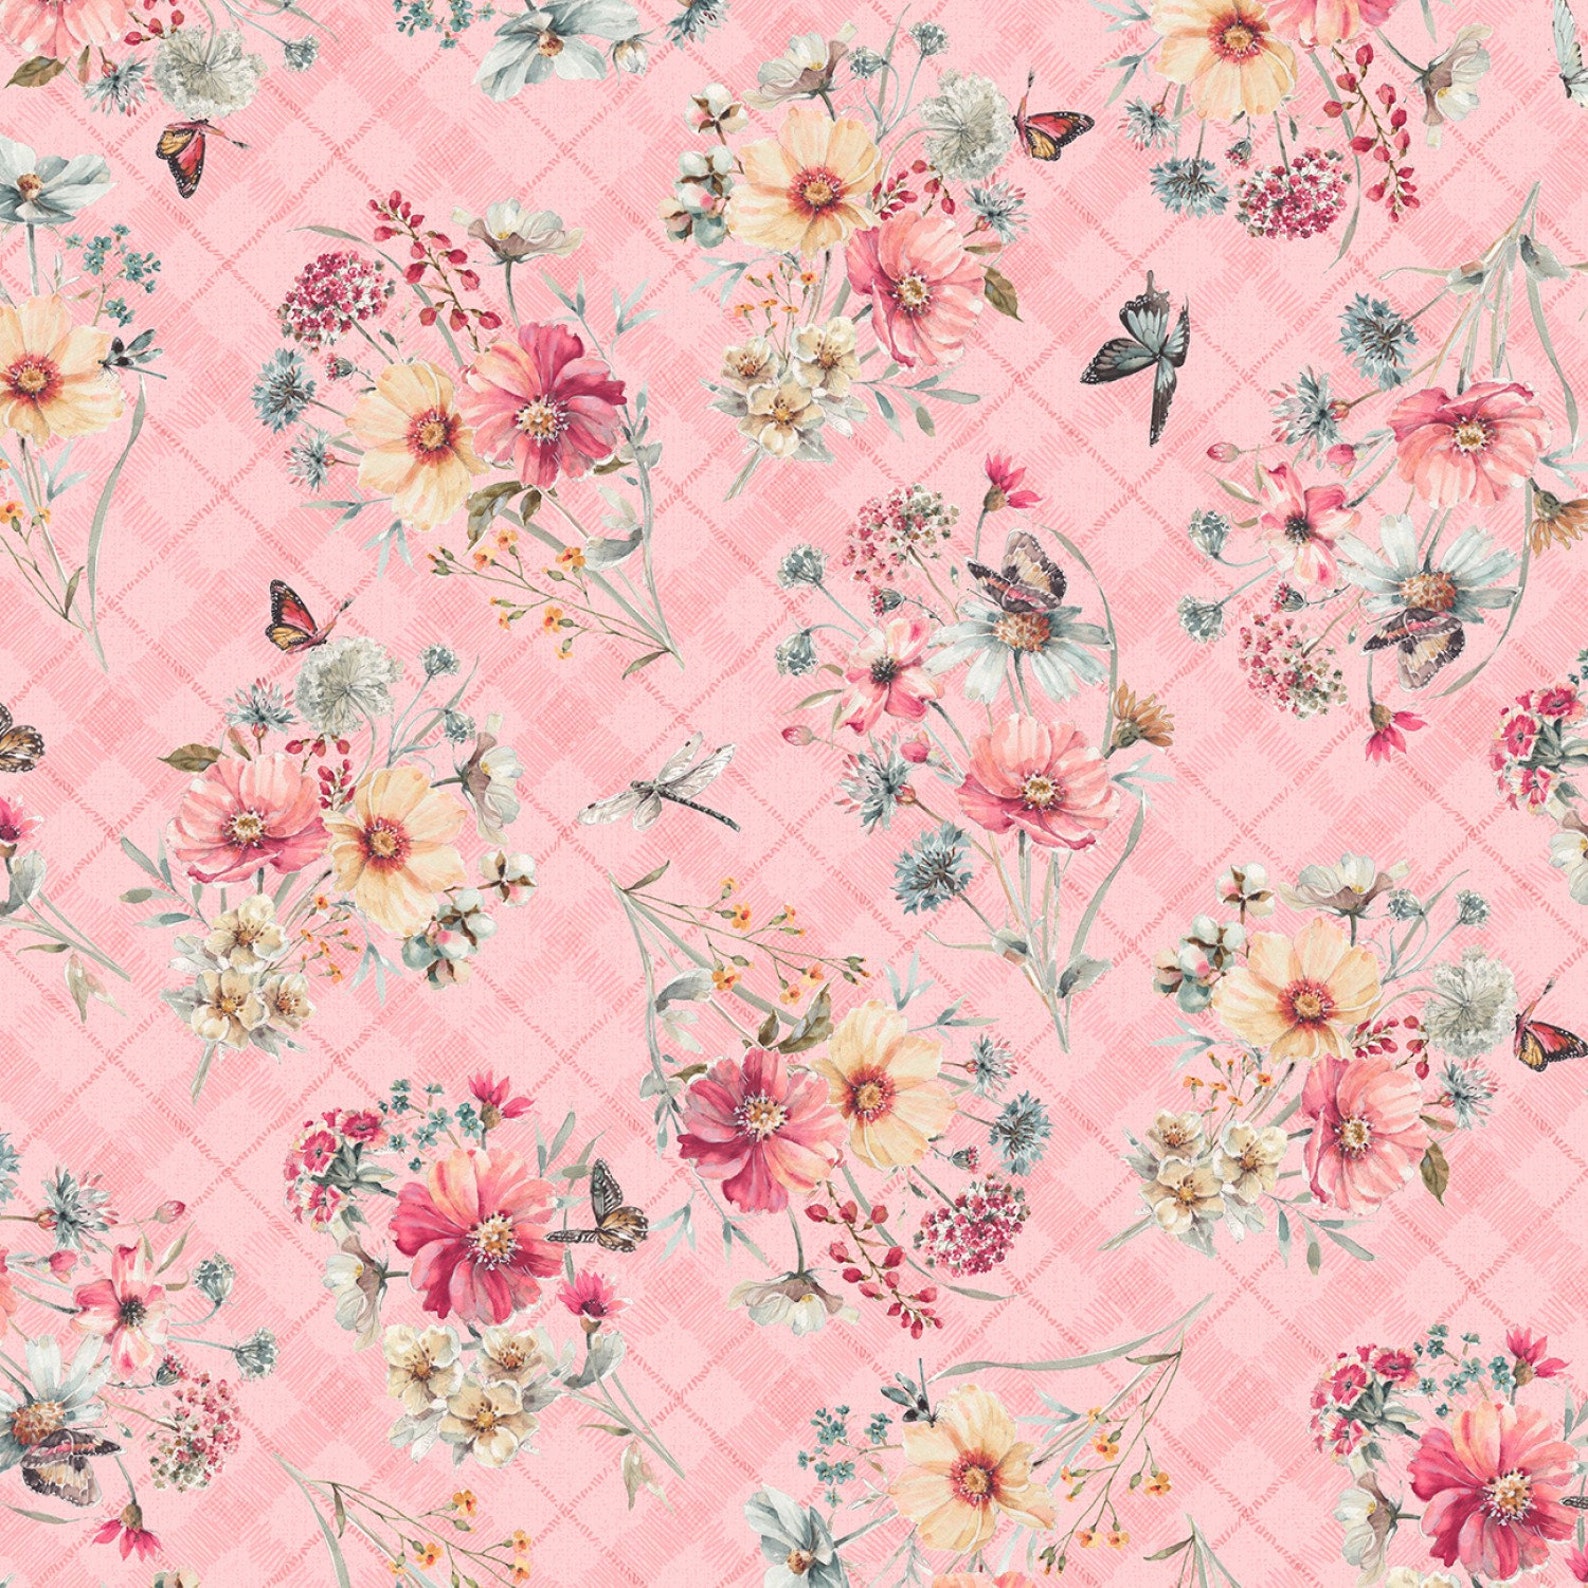 Plaid Pink Flower Bouquet Country Print Butterfly Fabric - Etsy